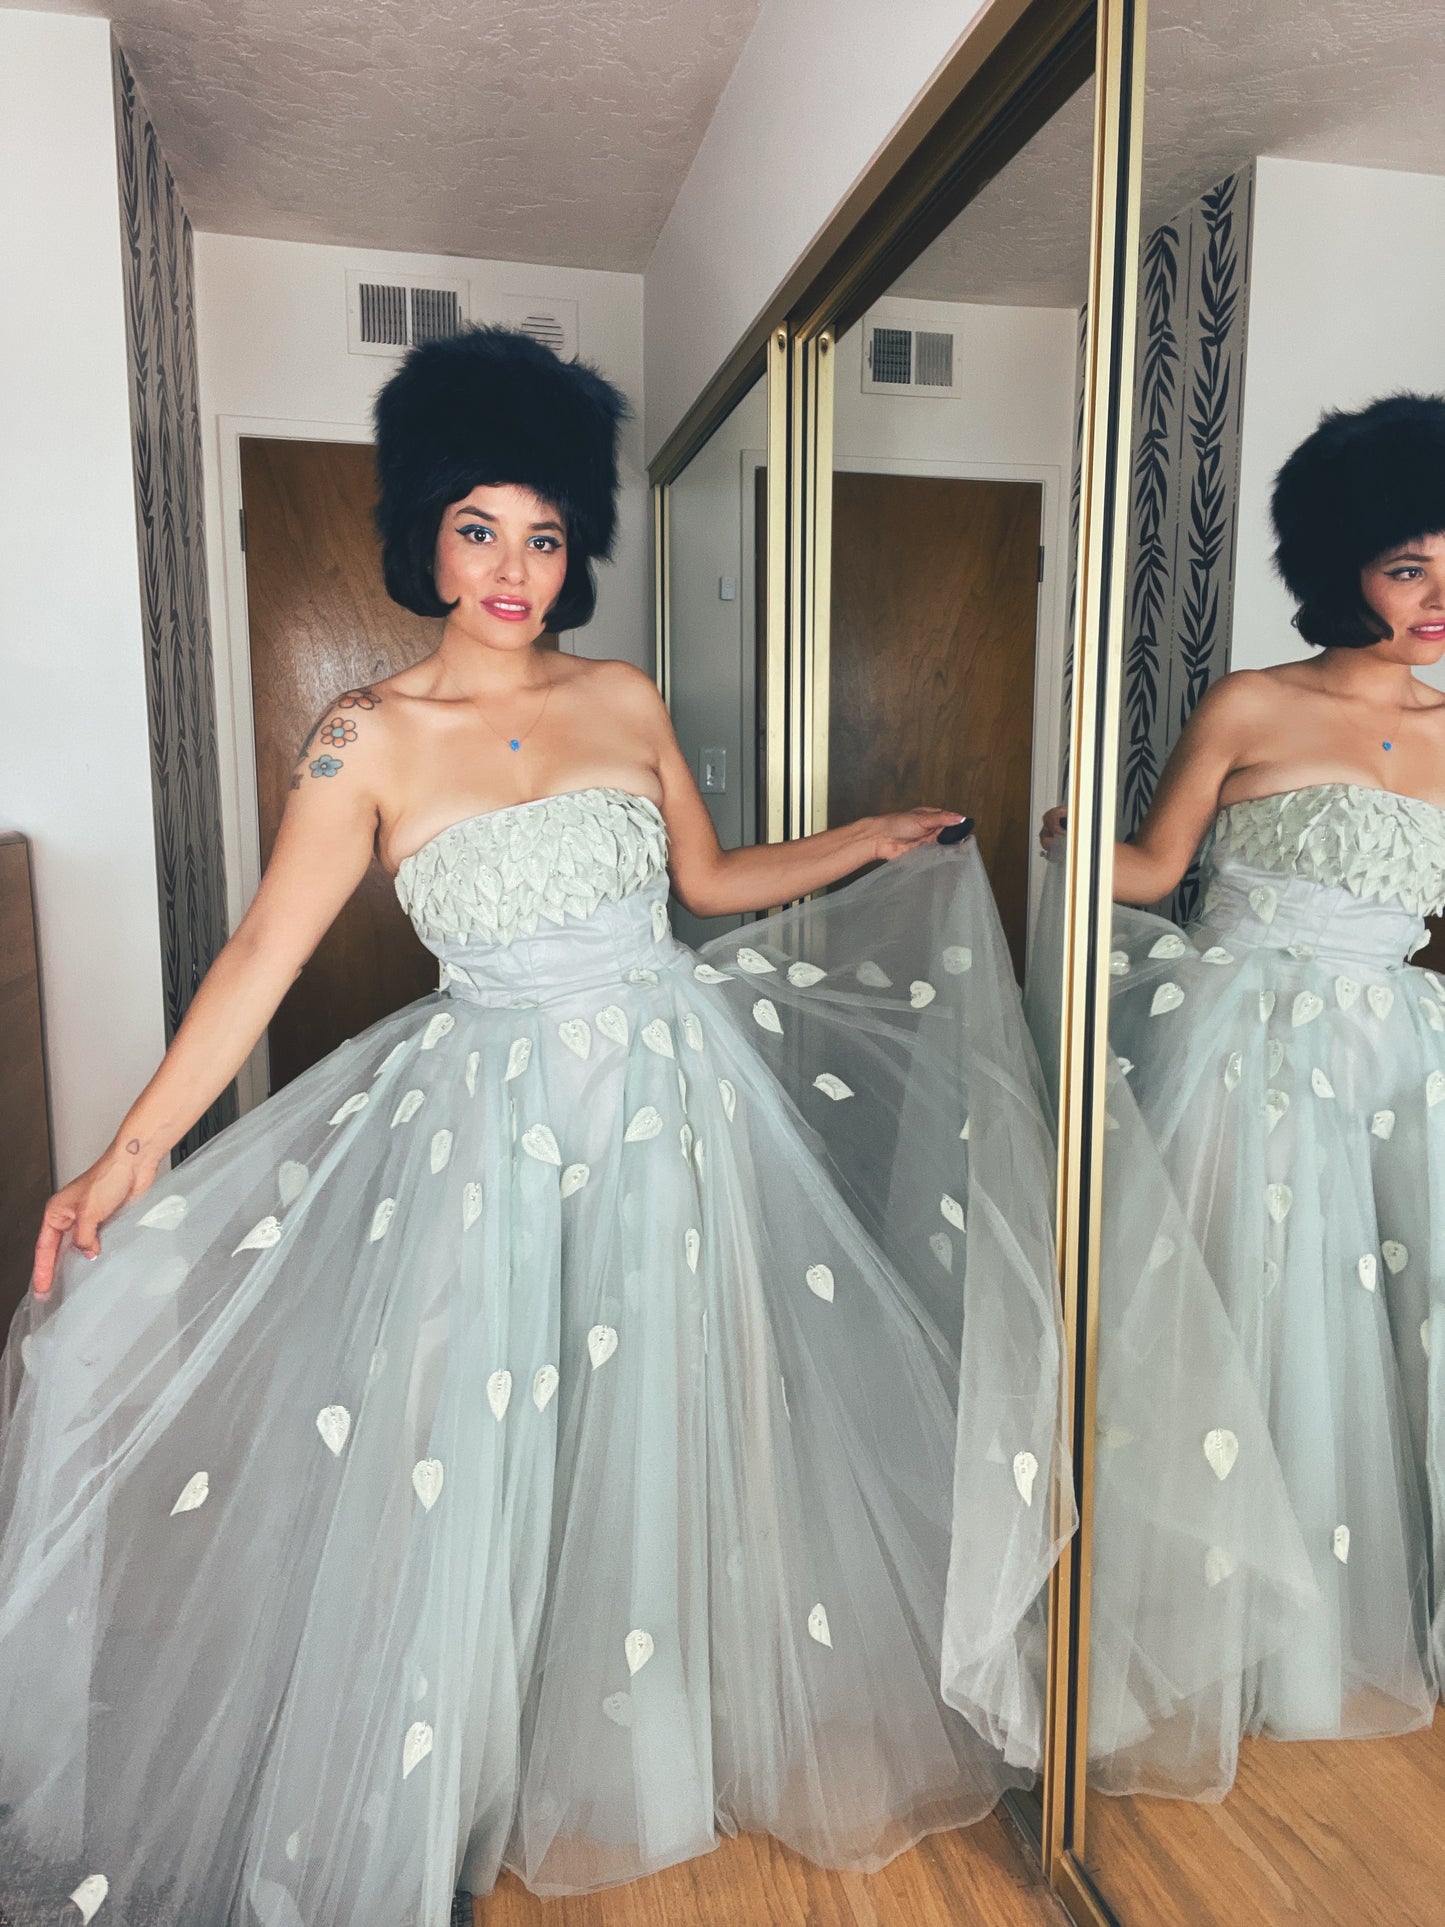 Vintage 50s / 60s Emma Domb California Leaf Rhinestone Tulle Gown Fits Sizes XS-SM